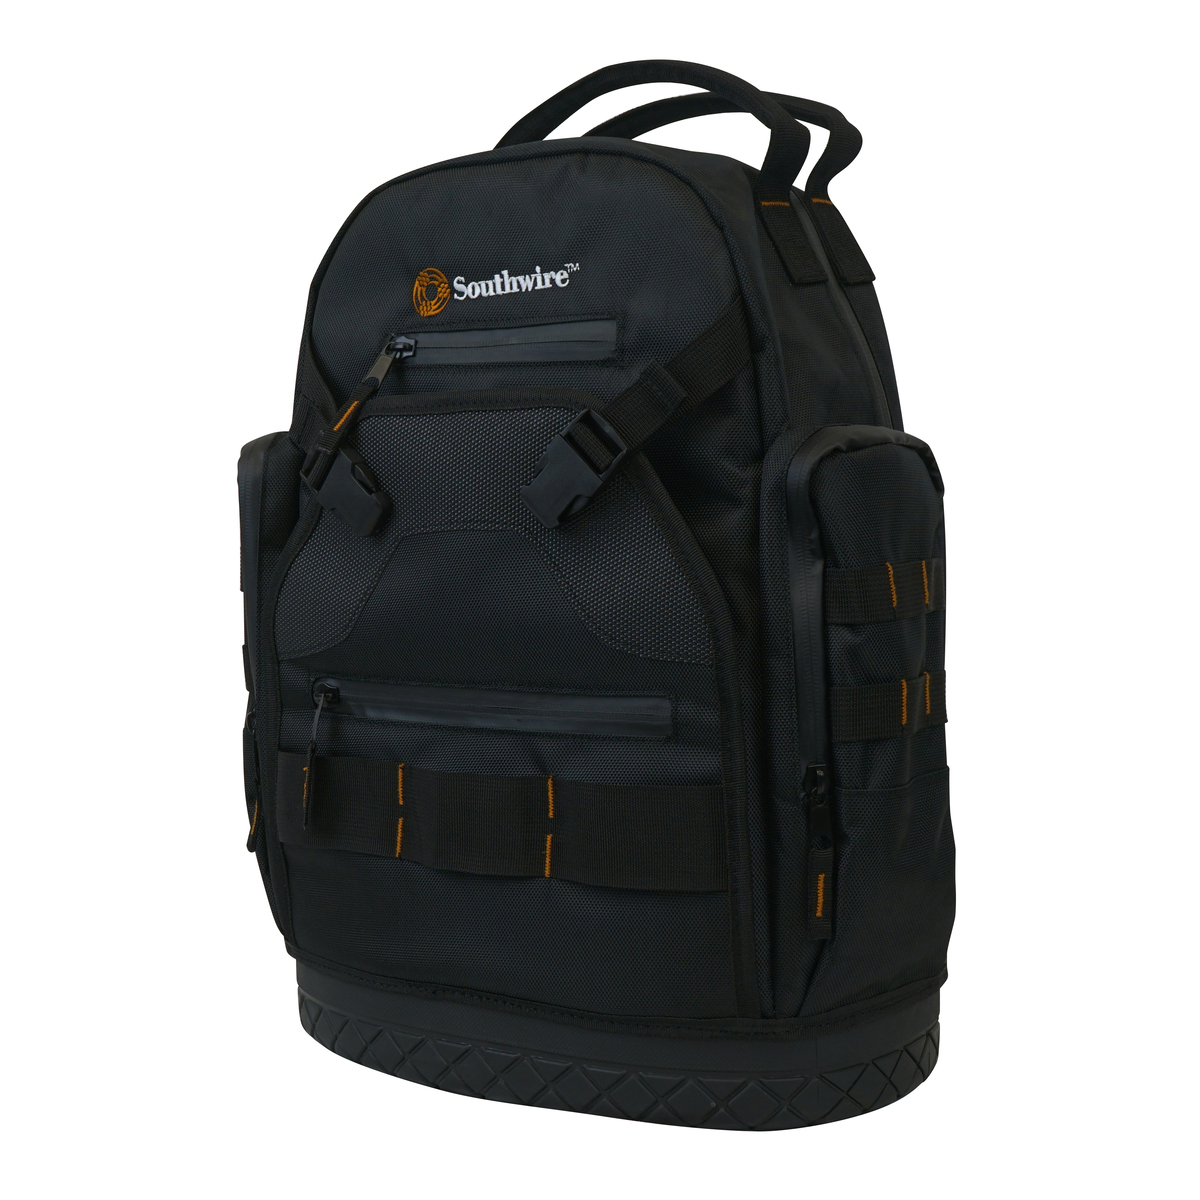 PROBAGBP Tool Backpack